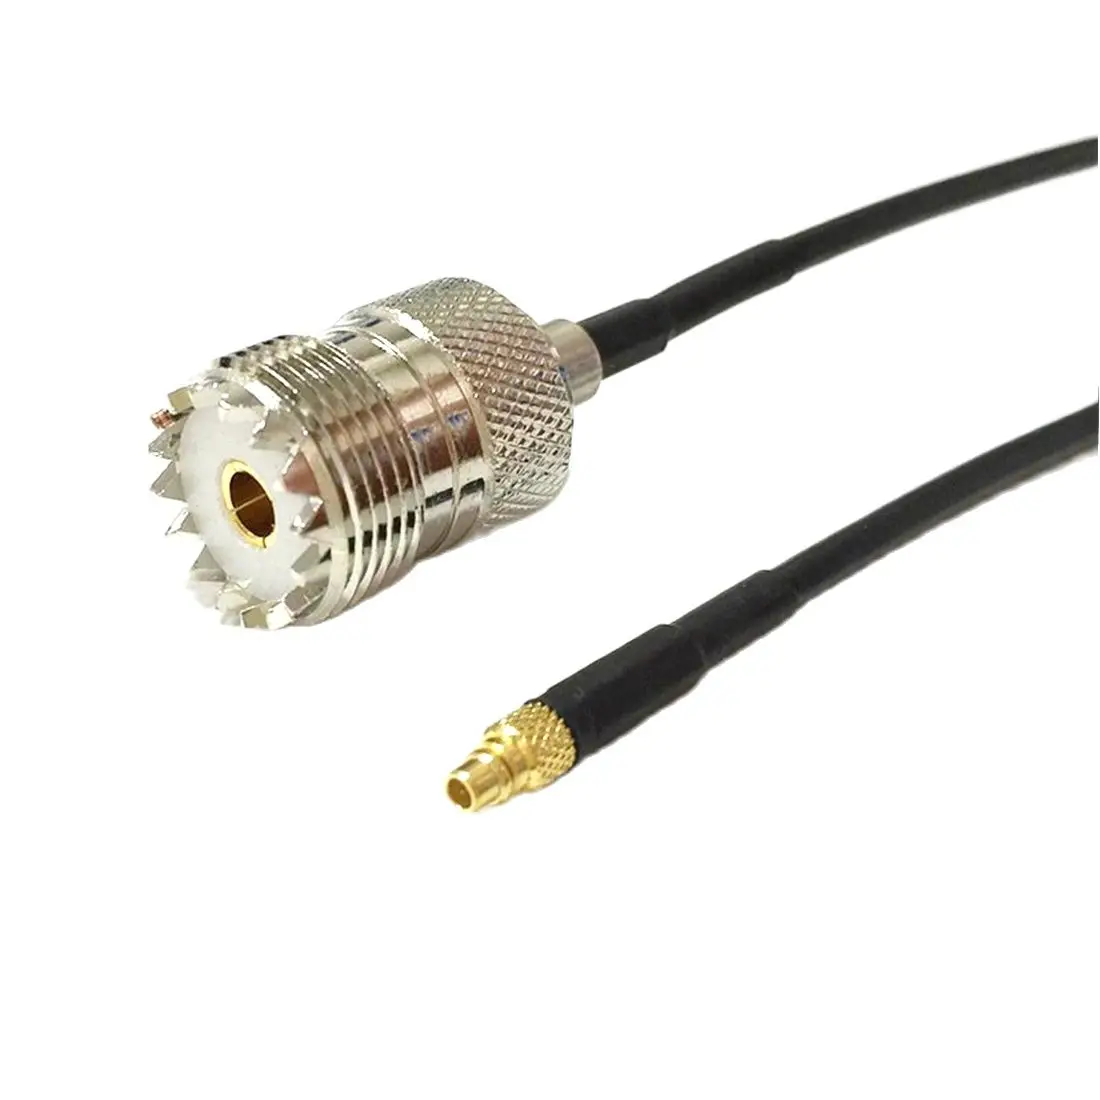 New Modem Coaxial Cable UHF Female Jack Connector Switch MMCX Male Plug Connector RG174 Cable 20CM 8inch Adapter in 1 dualuse 2 way port tv signal satellite sat coaxial diplexer combiner splitter combiners cable switch switcher js sp02